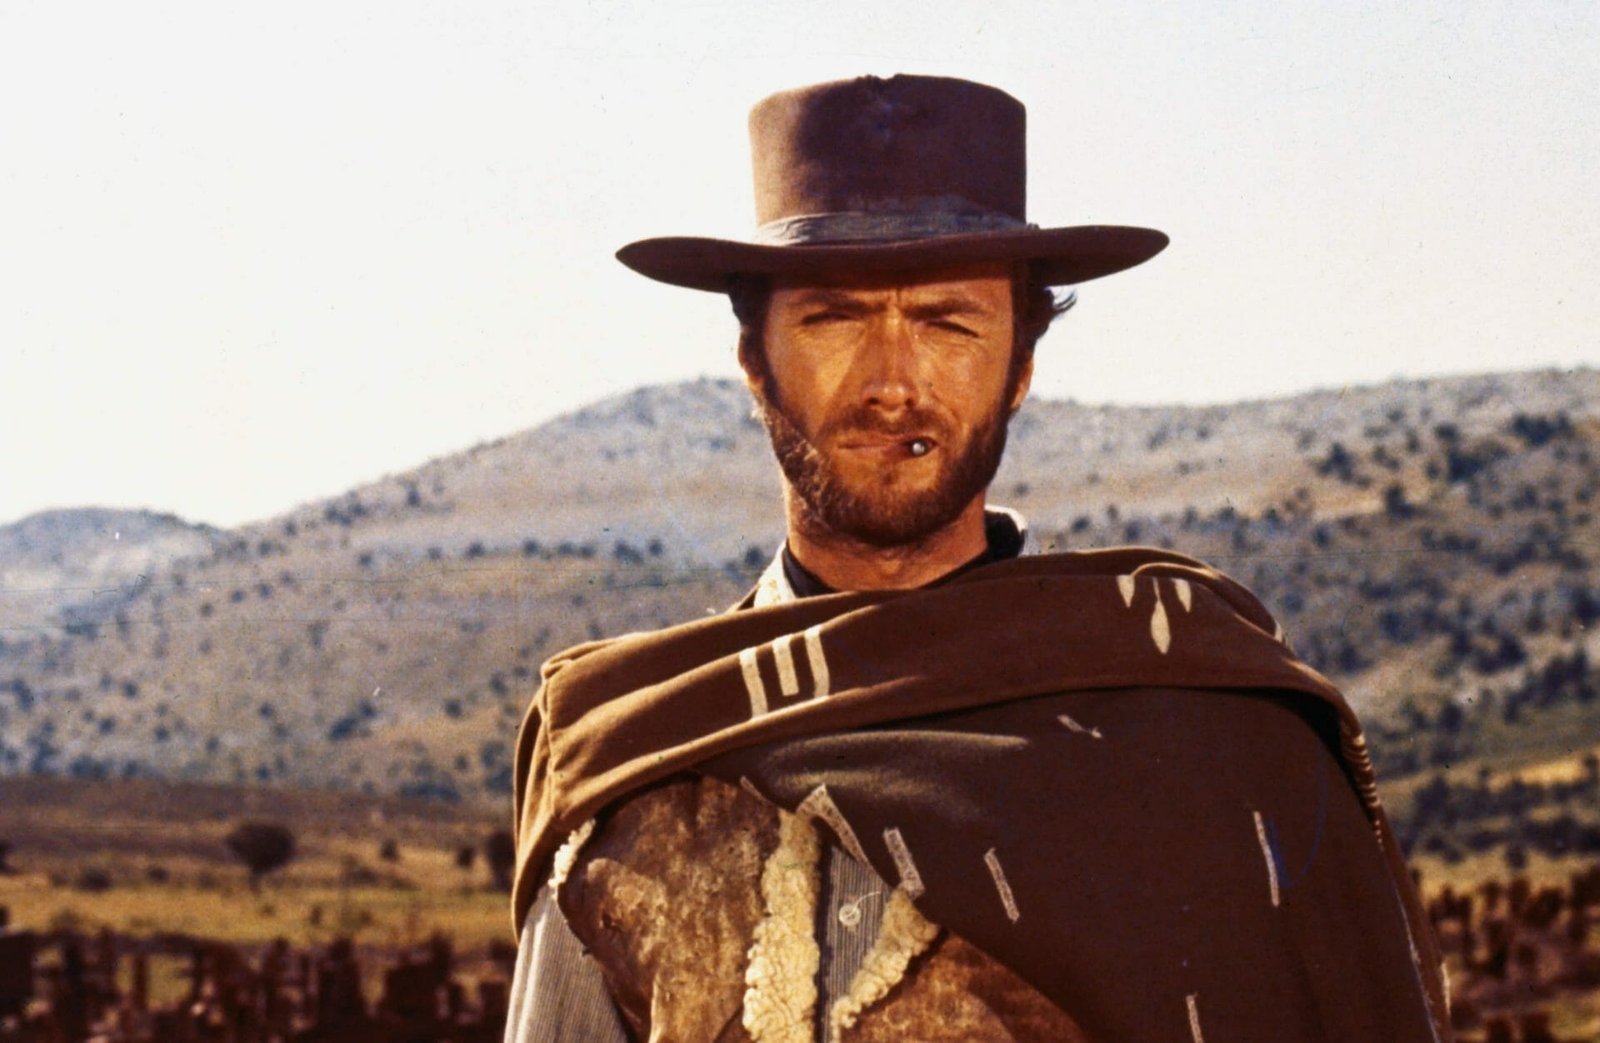 Best Clint Eastwood movies:The good, the bad, and the ugly (1967)